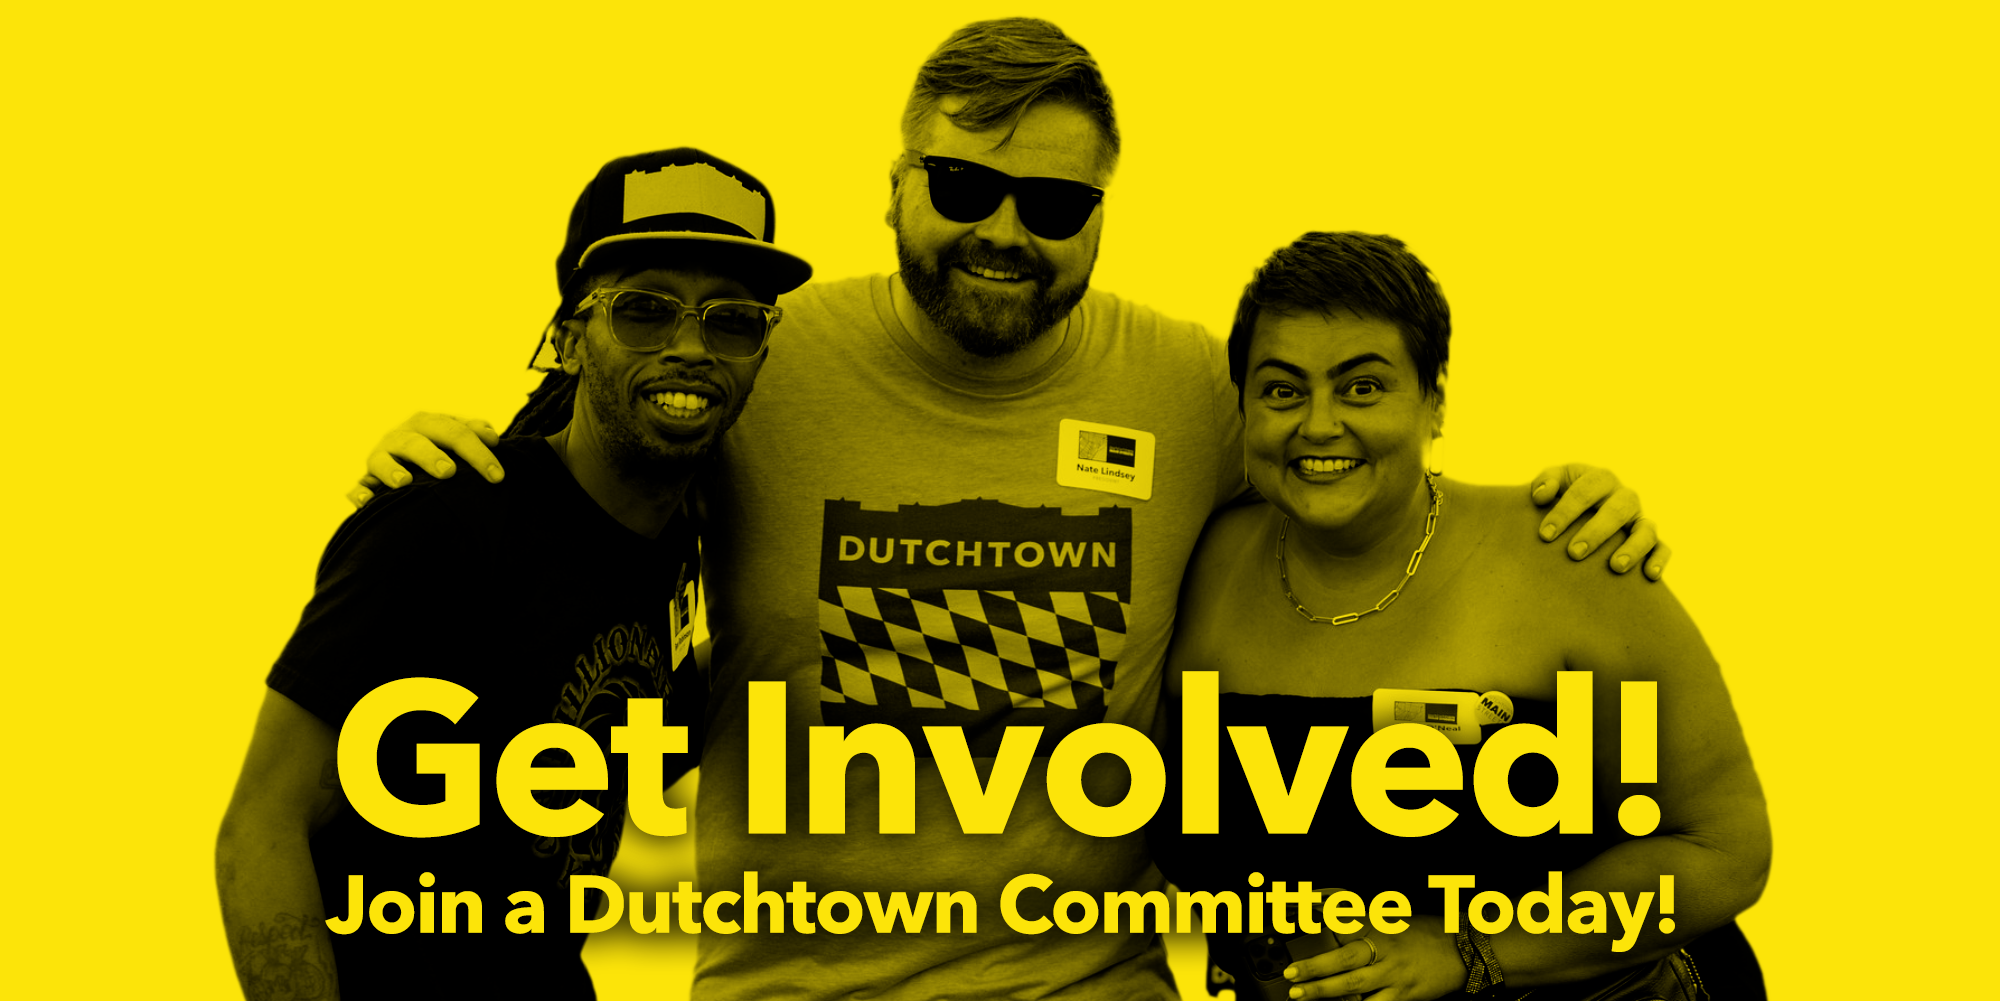 Get involved! Join a Dutchtown Committee today!